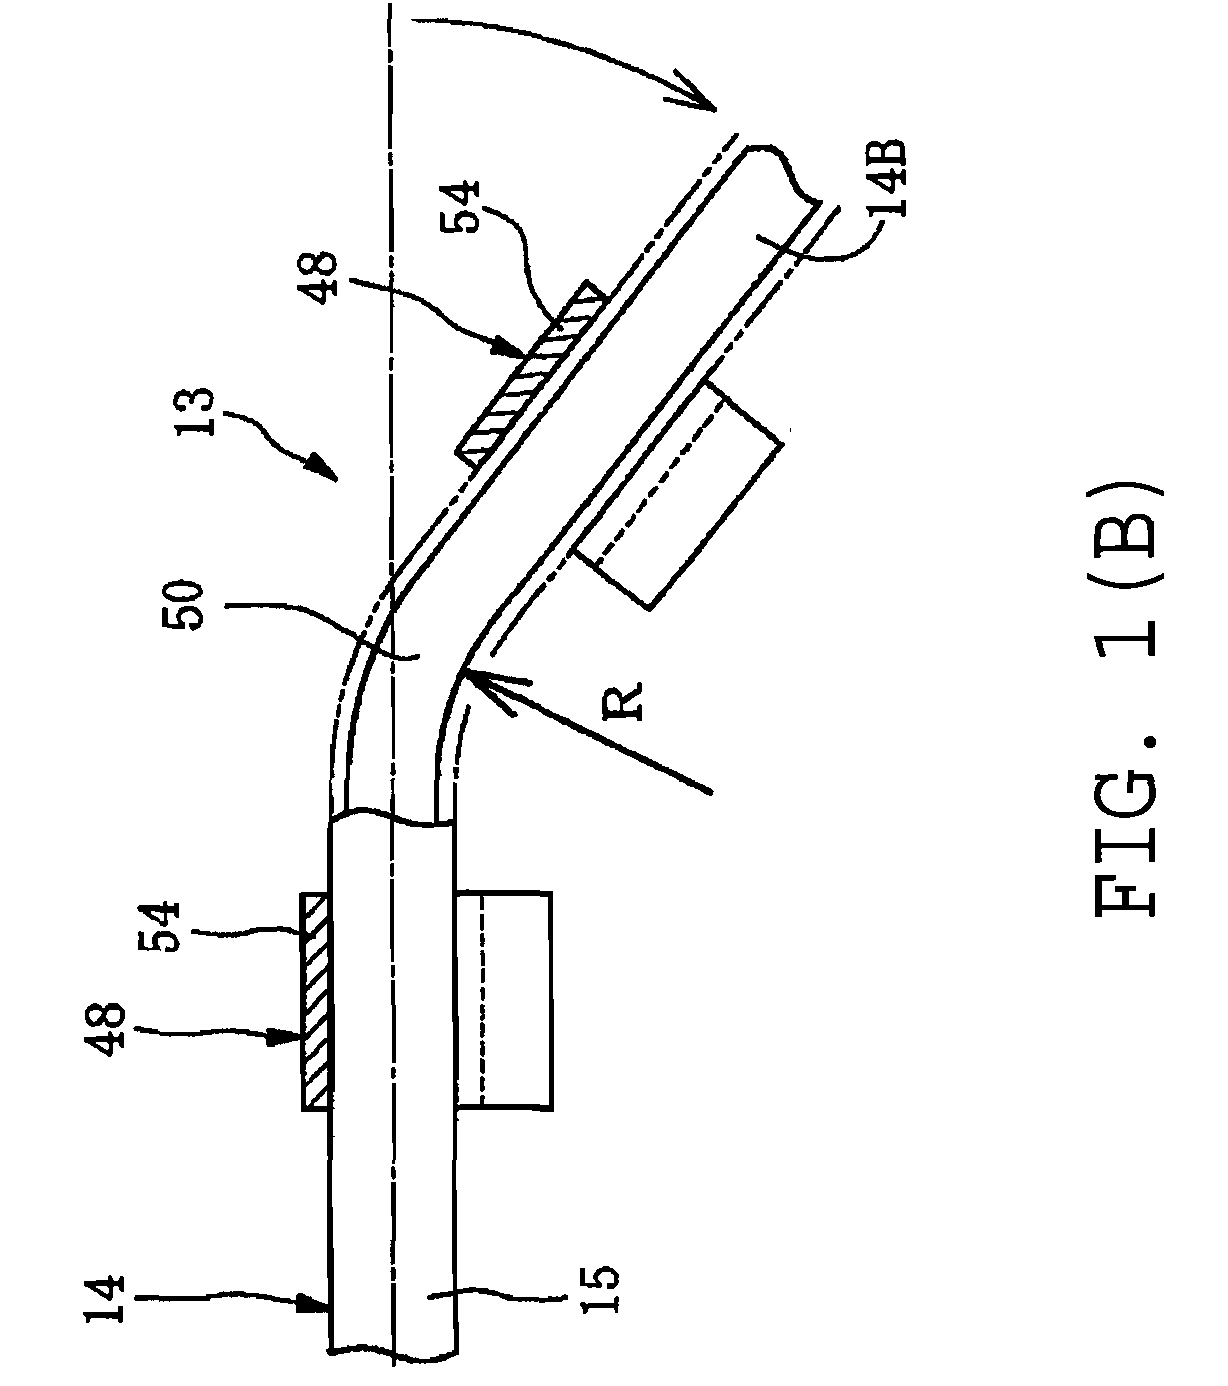 Piping Unit for Transporting Fuel